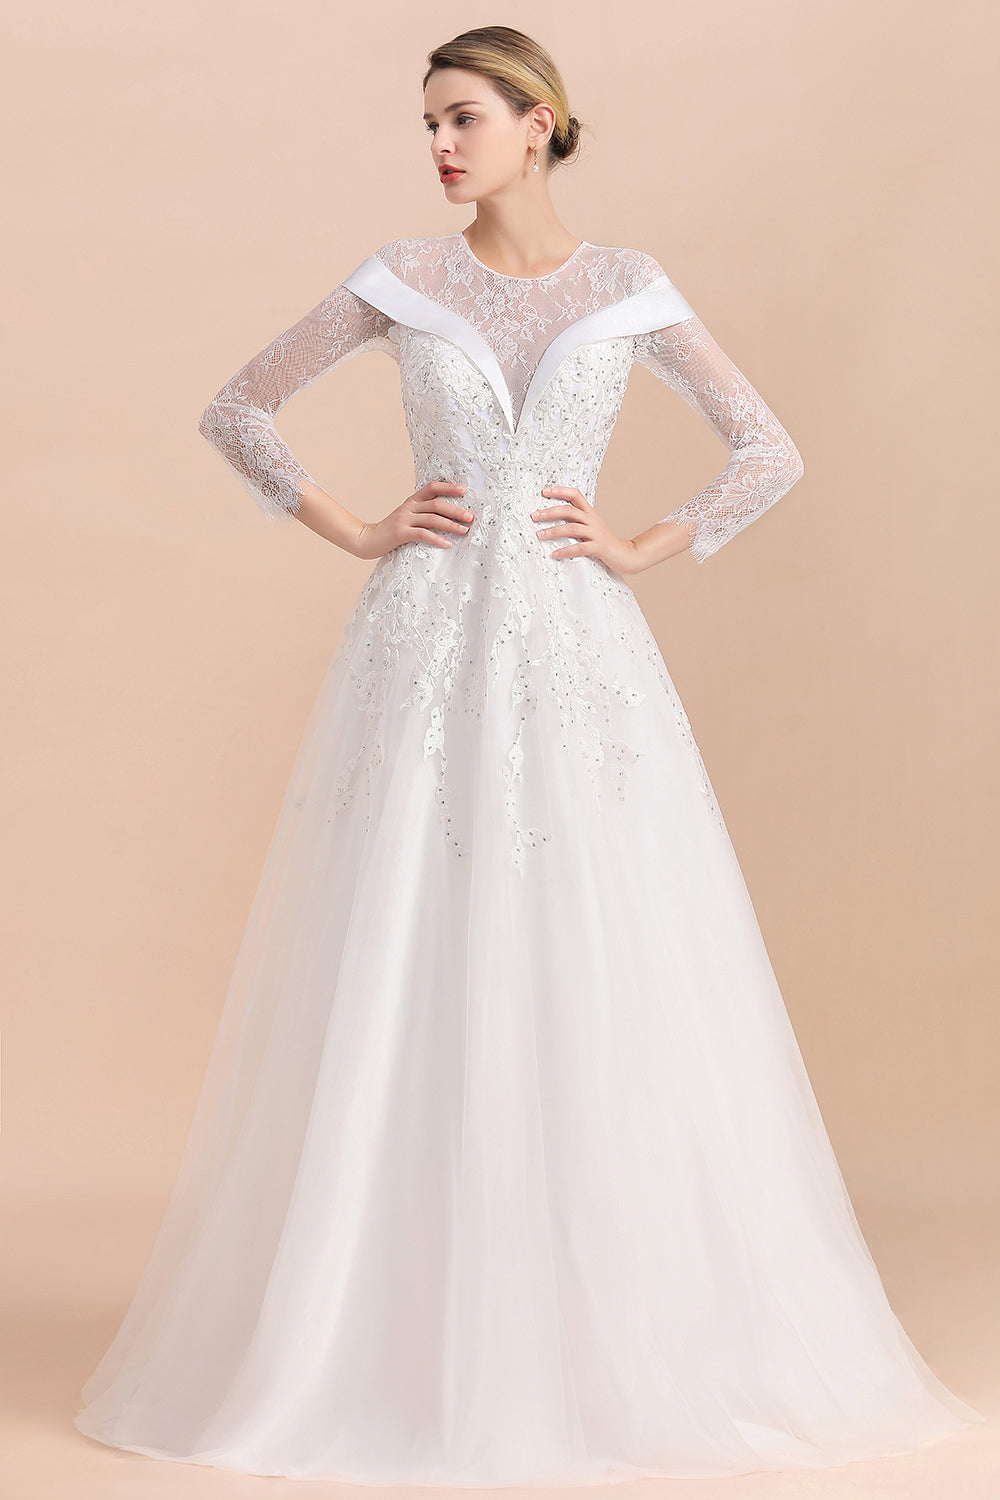 Gorgeous Long Sleeve Lace Wedding Dress Online Appliques Bridal Gowns With Beadings-27dress